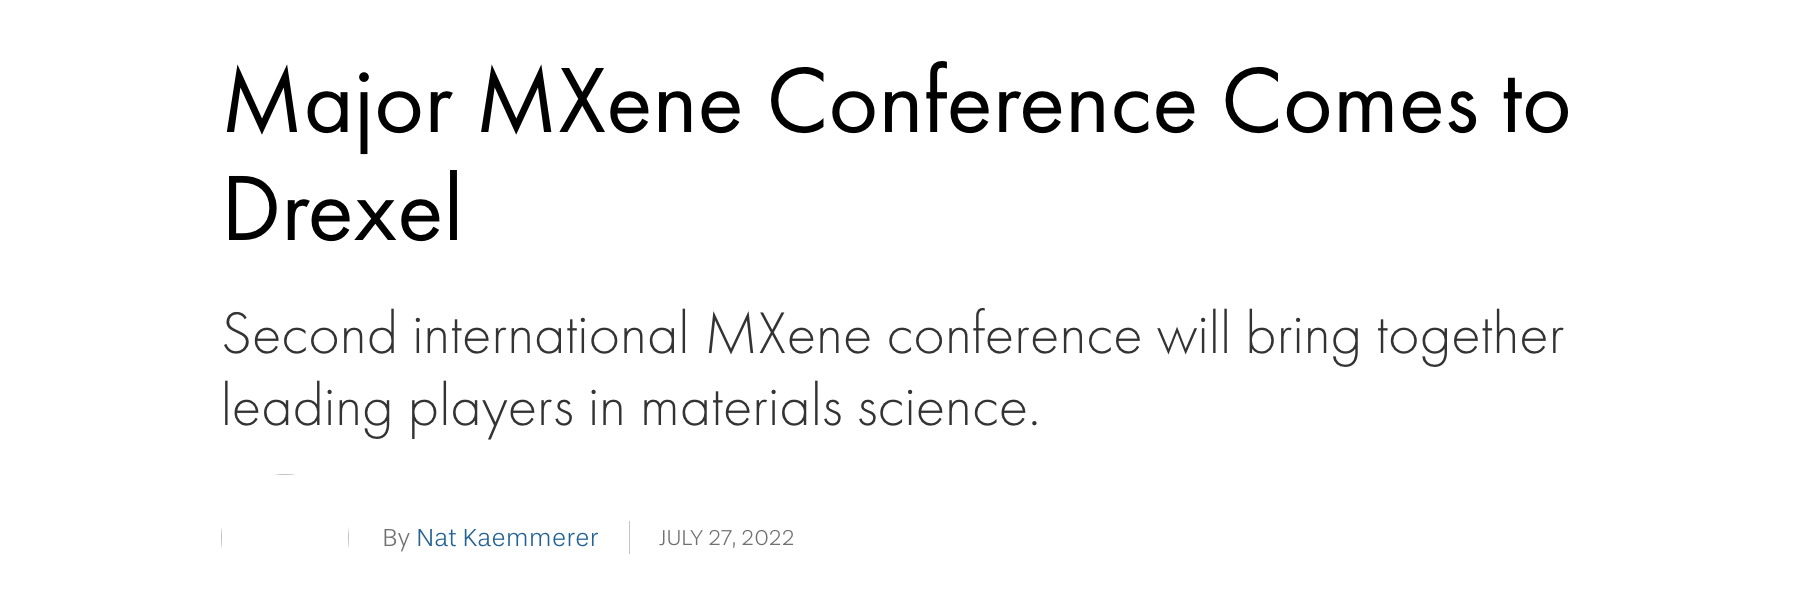 The MXene Conference 2022 Has Been Covered in DrexelNews